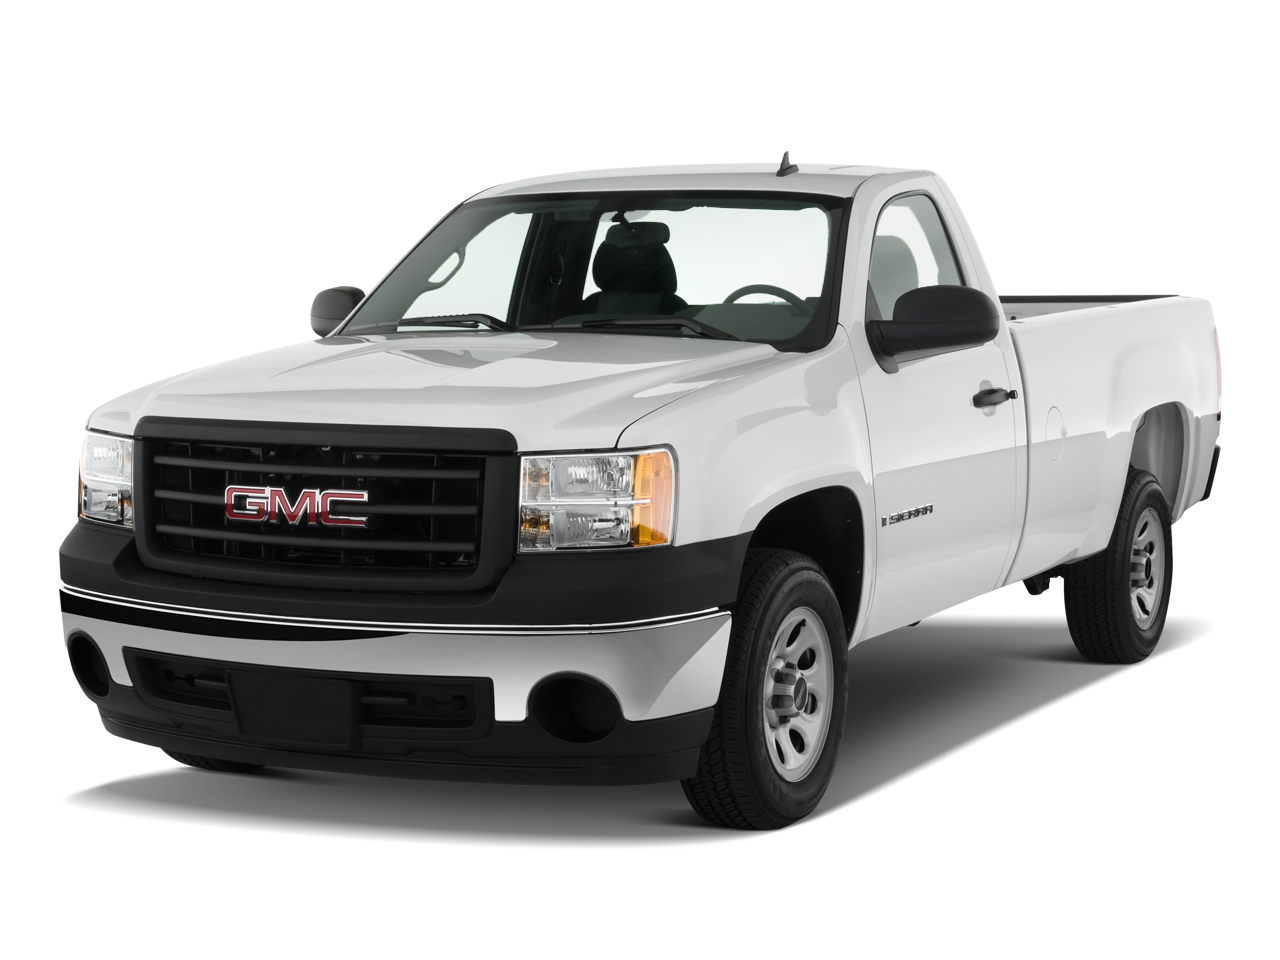 2013 GMC Sierra Prices, Reviews, and Photos - MotorTrend